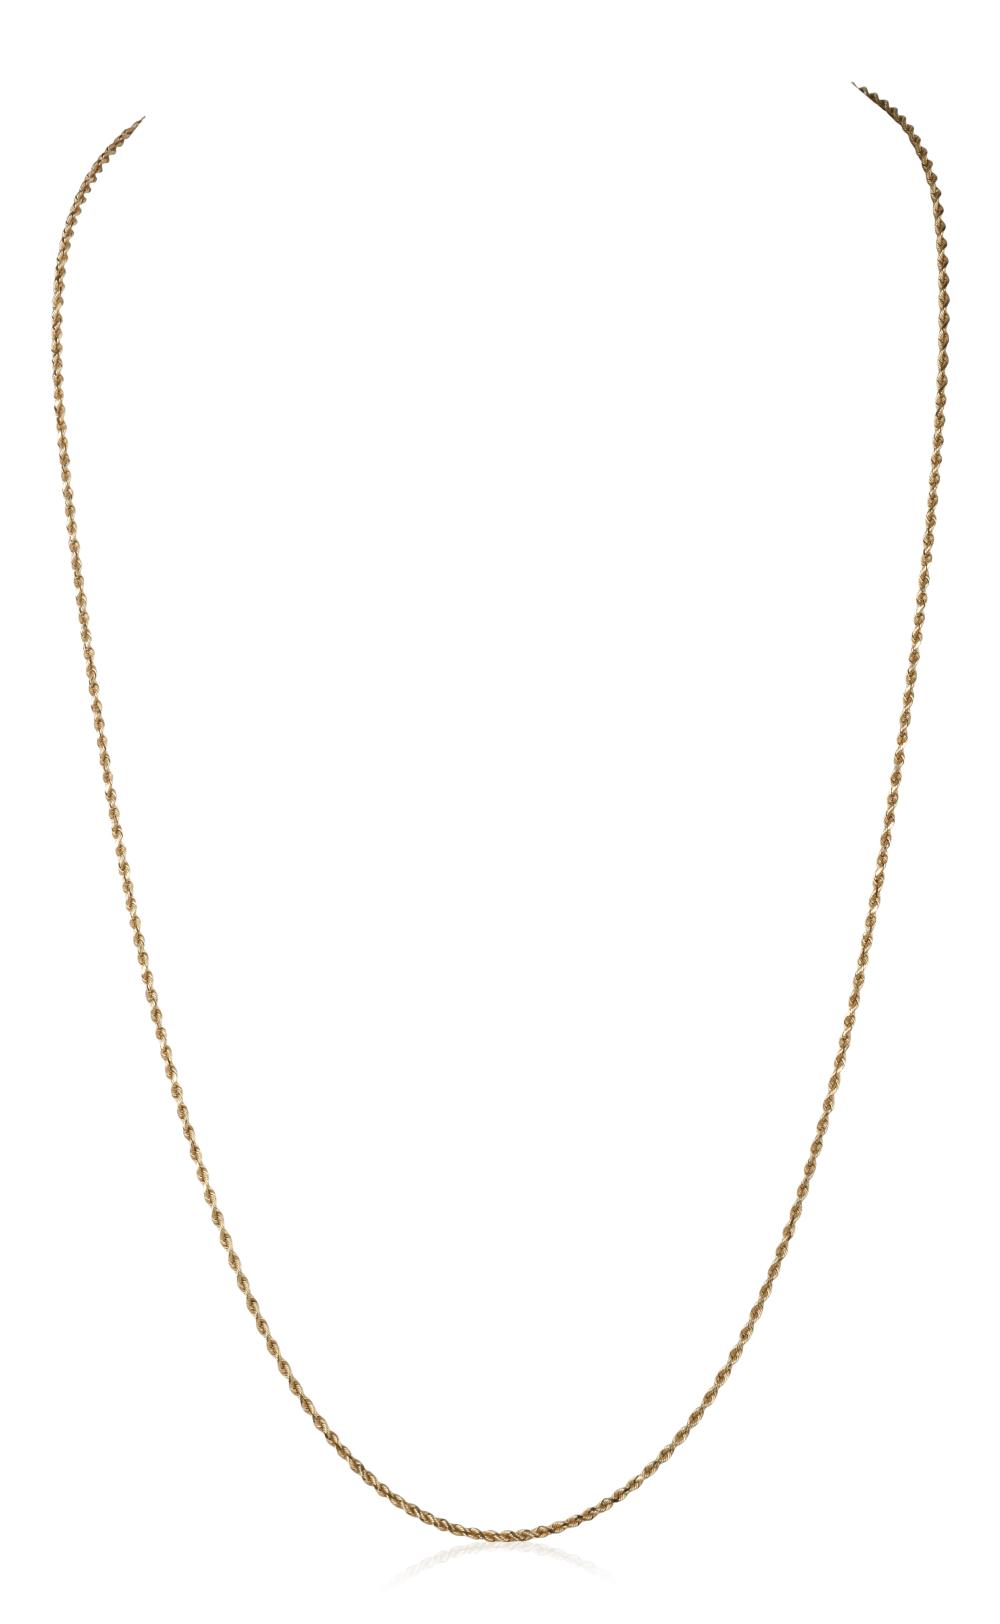 14K YELLOW GOLD ROPE CHAIN NECKLACE 33db15